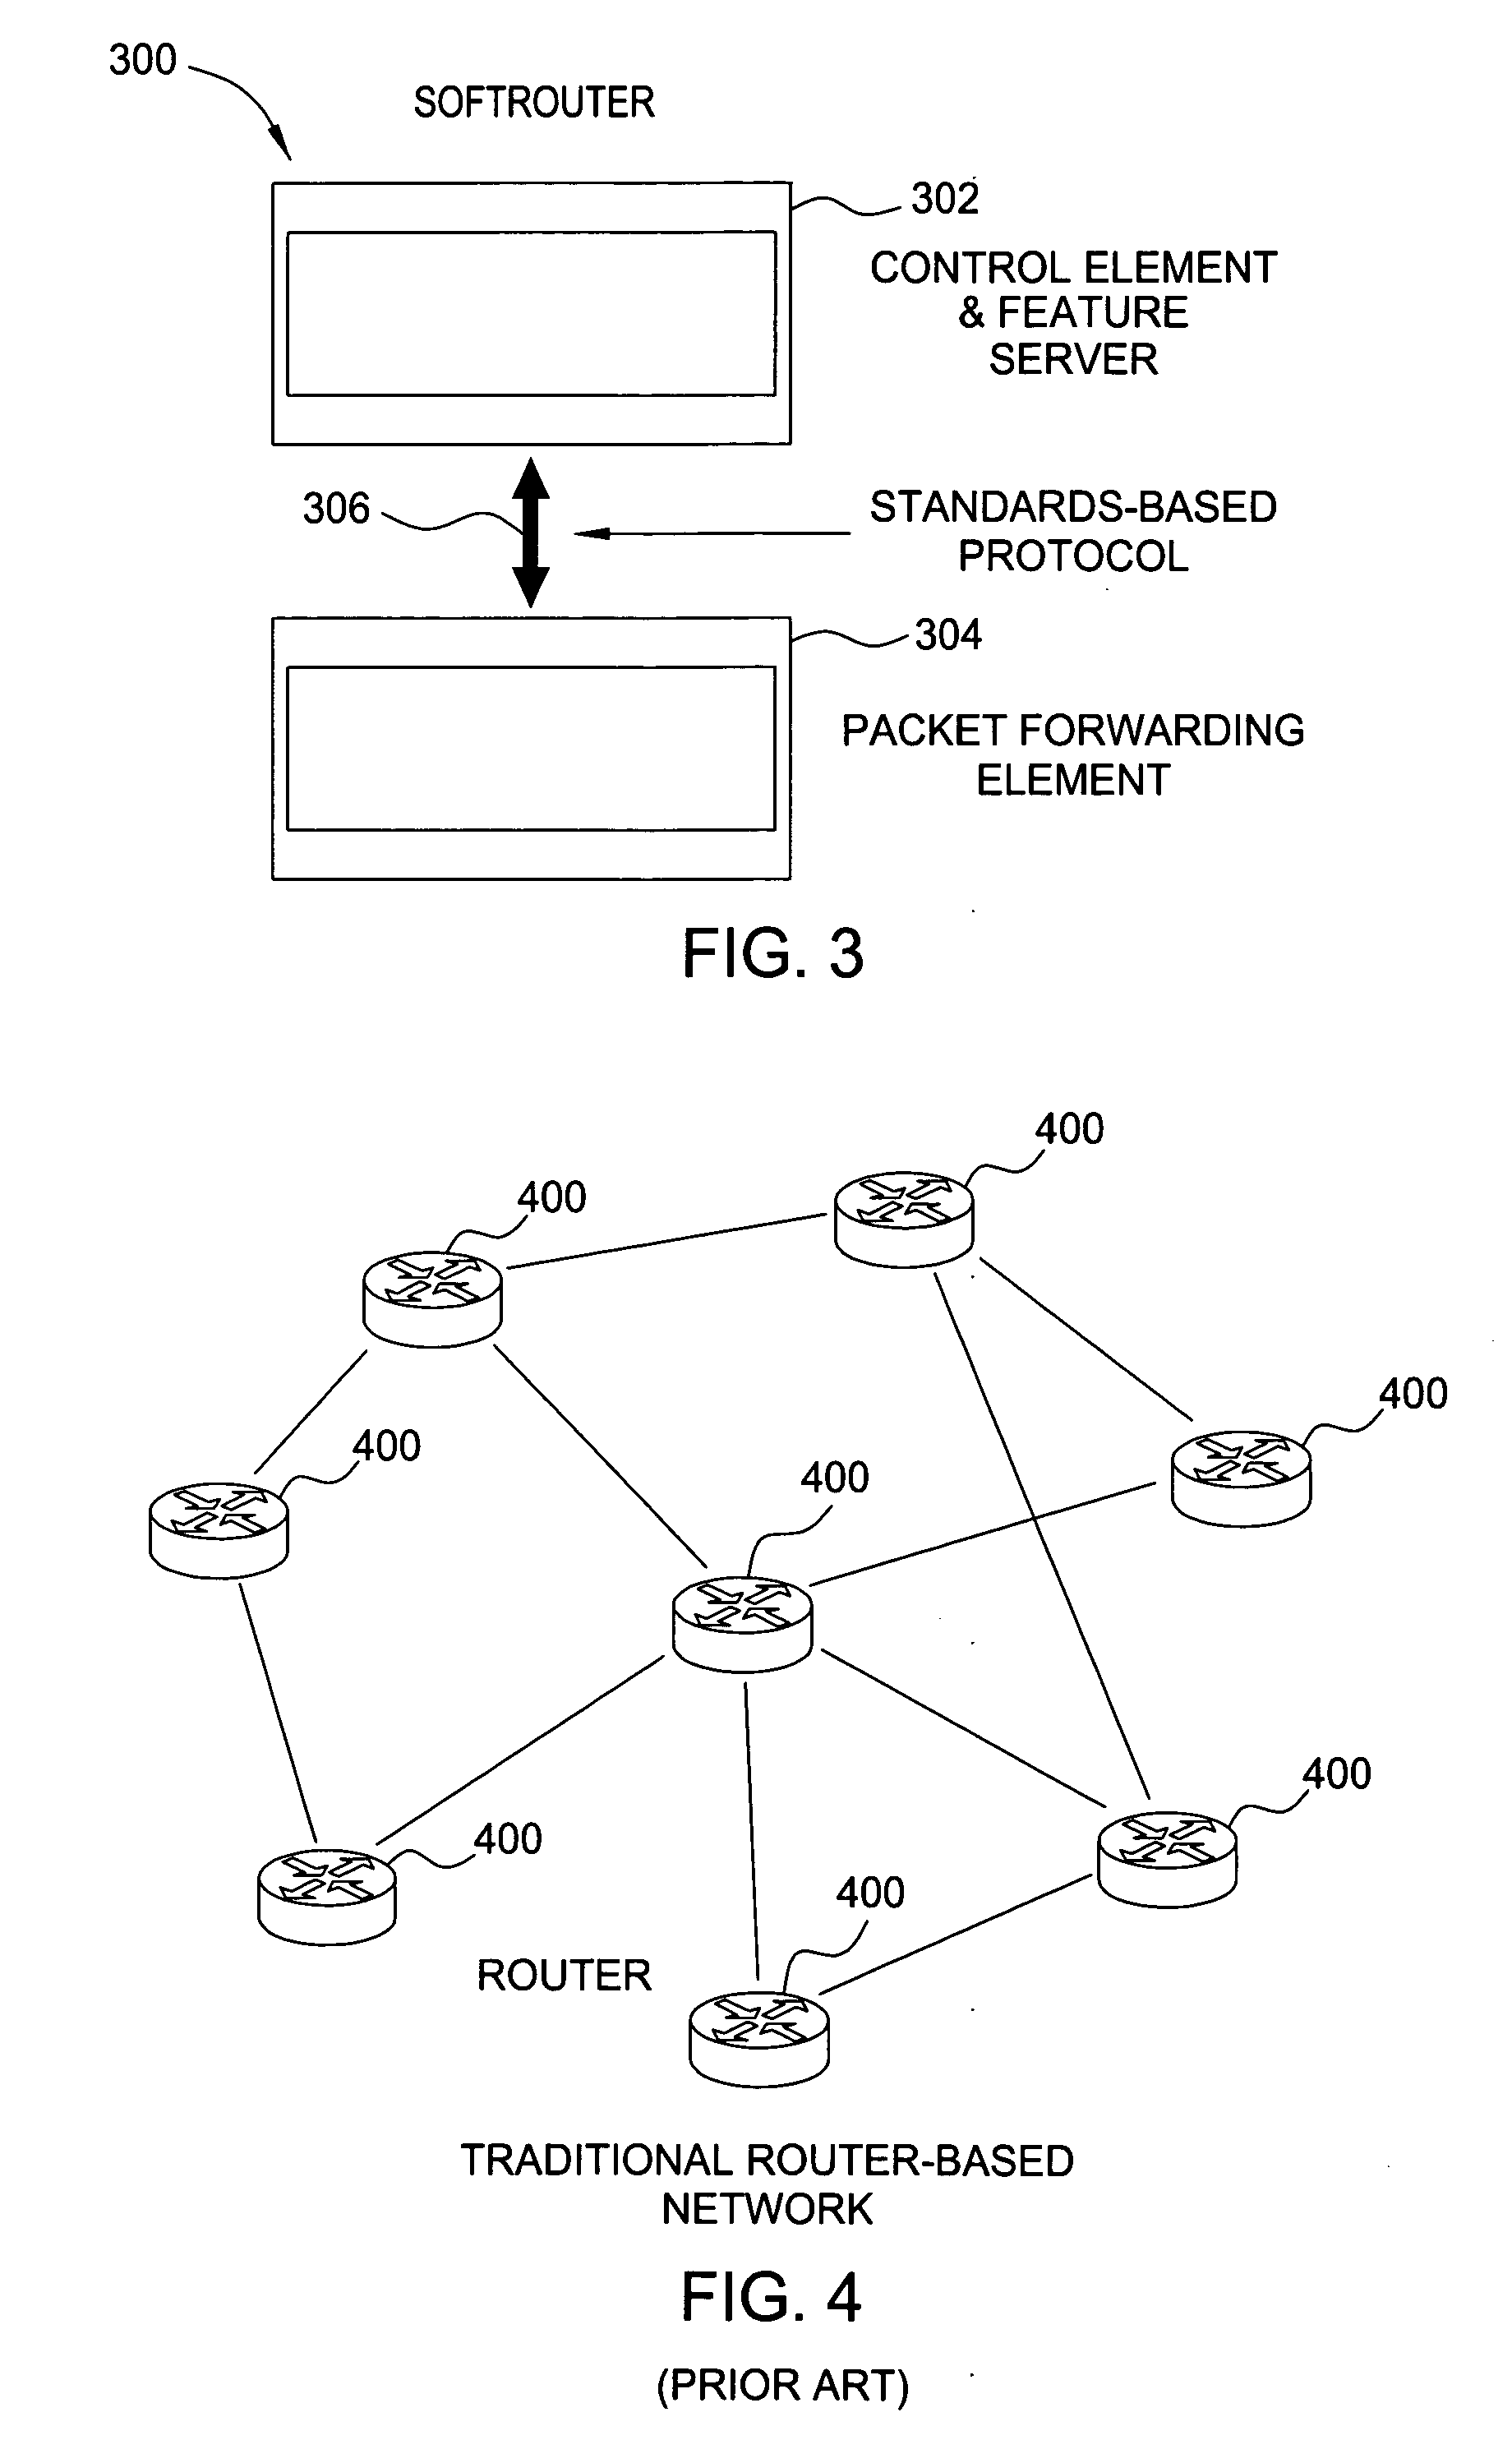 Softrouter separate control network